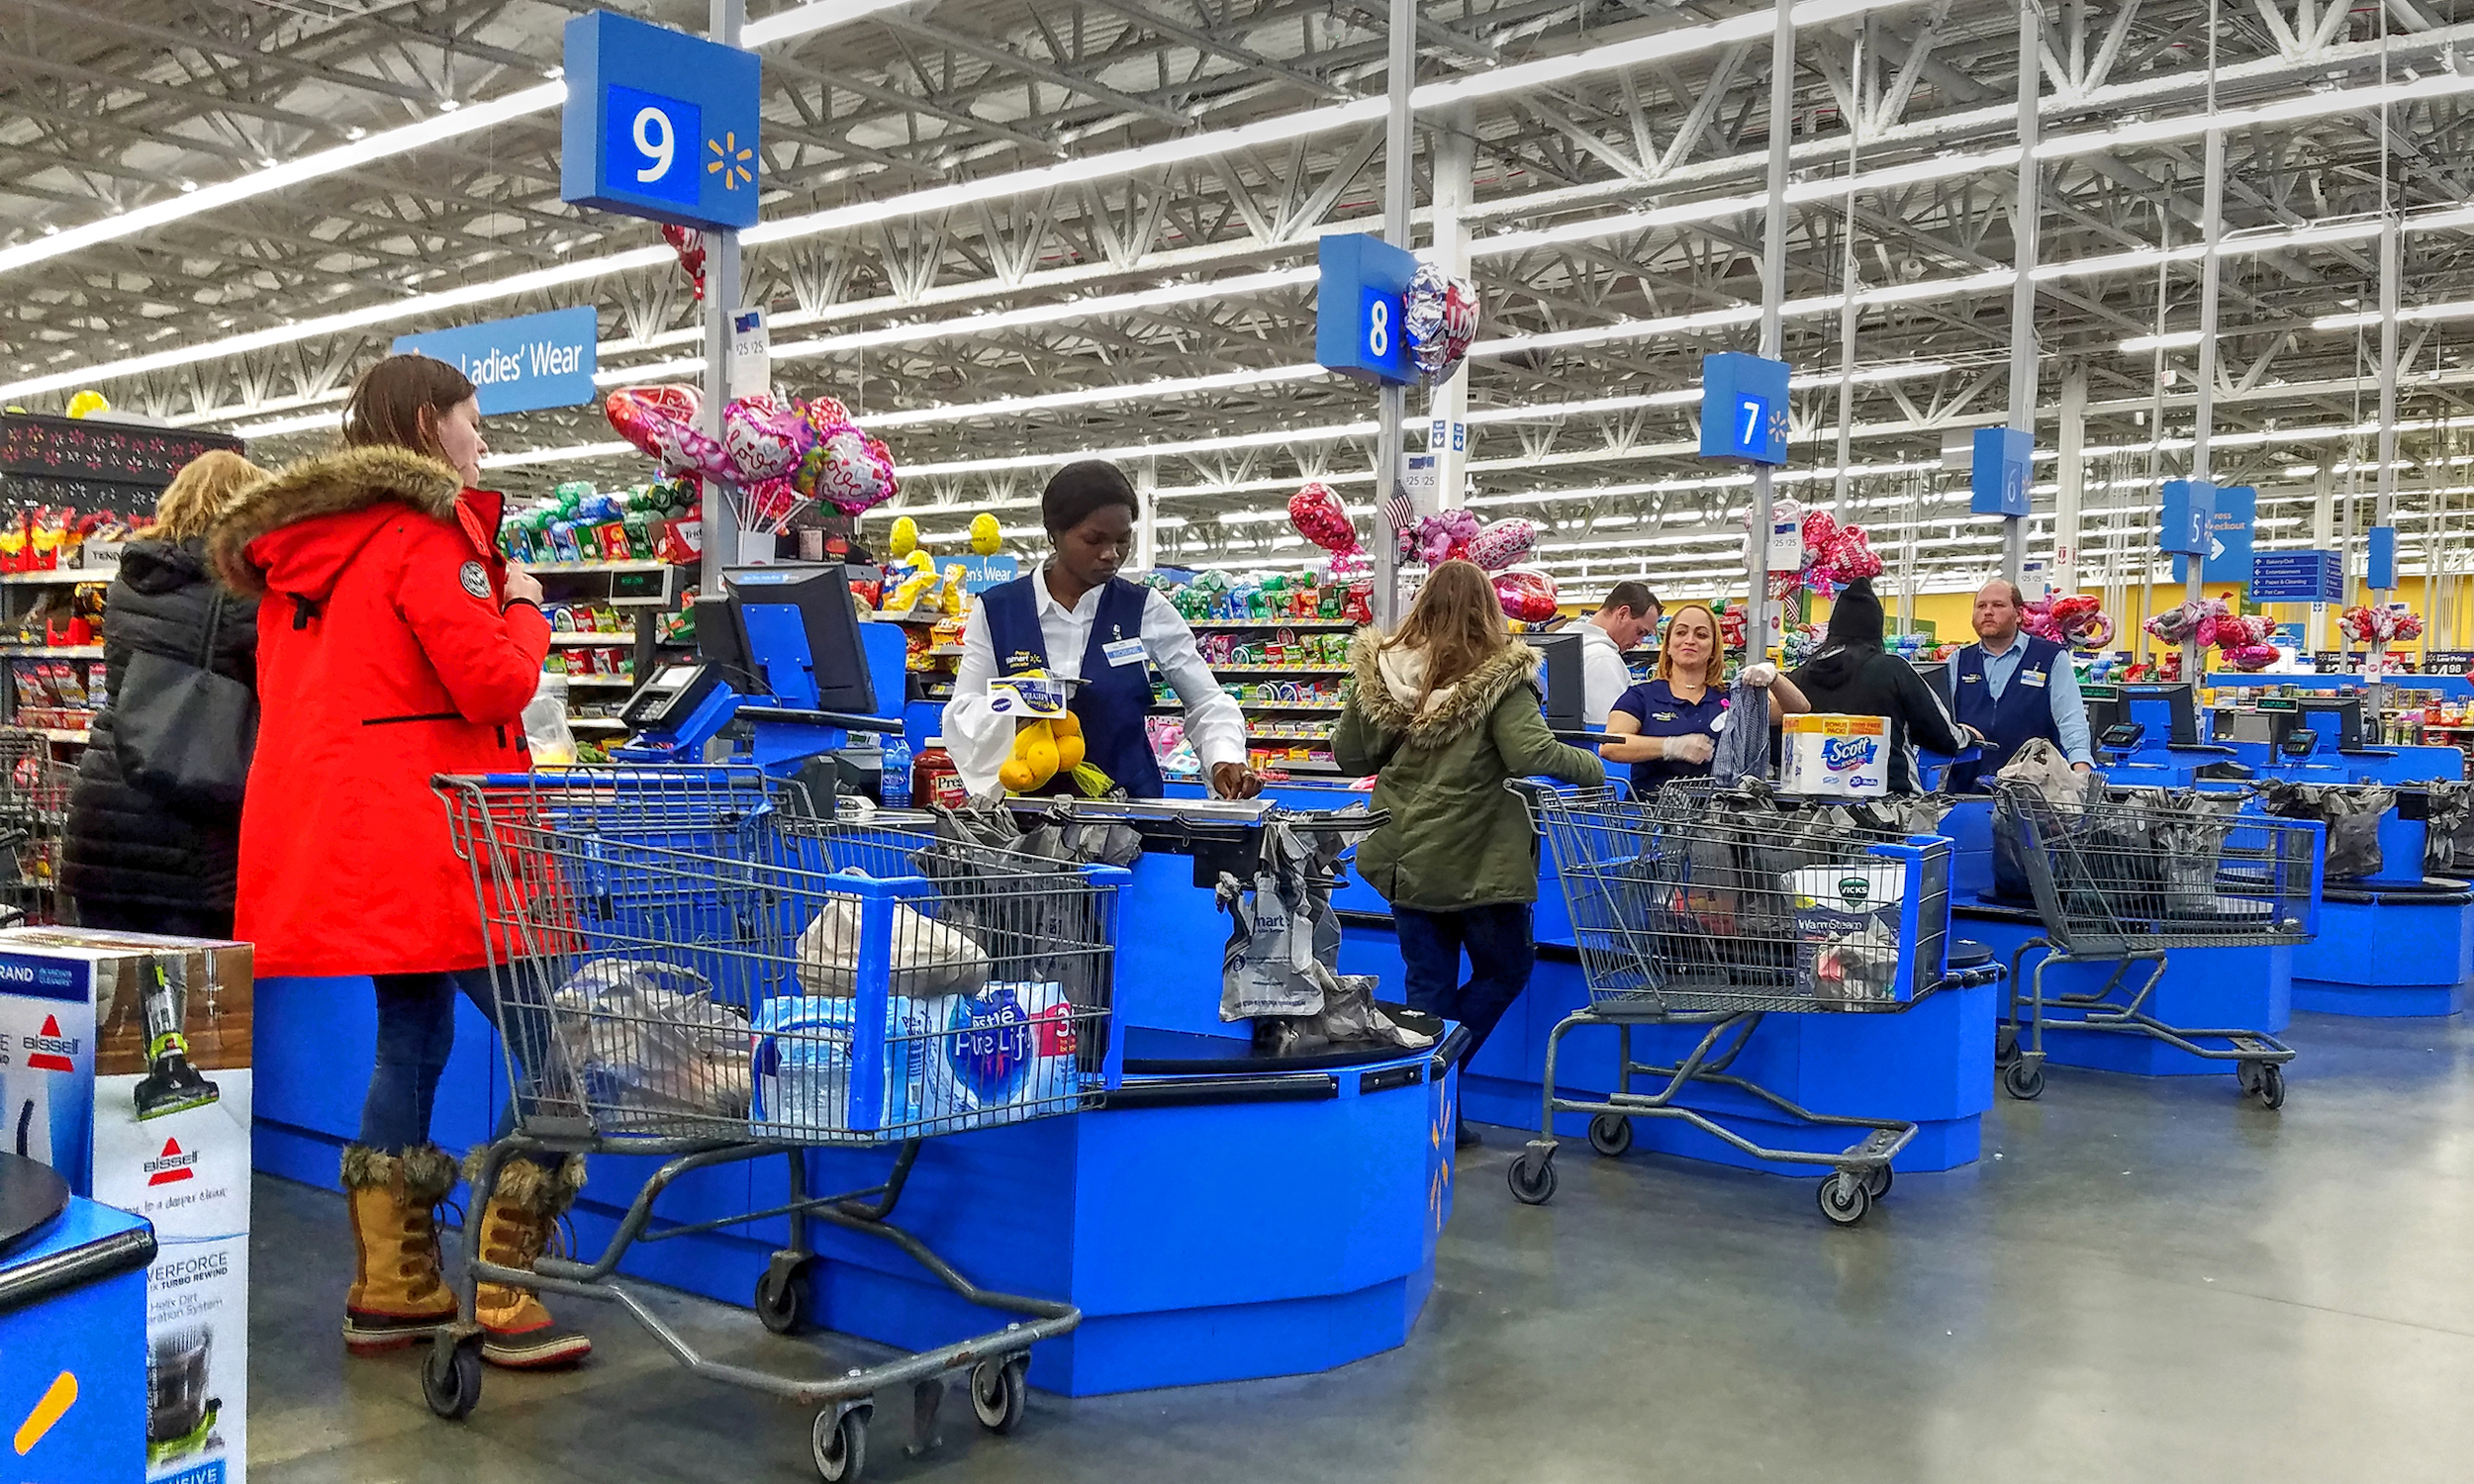 Walmart is on the hunt for its own streaming partnership